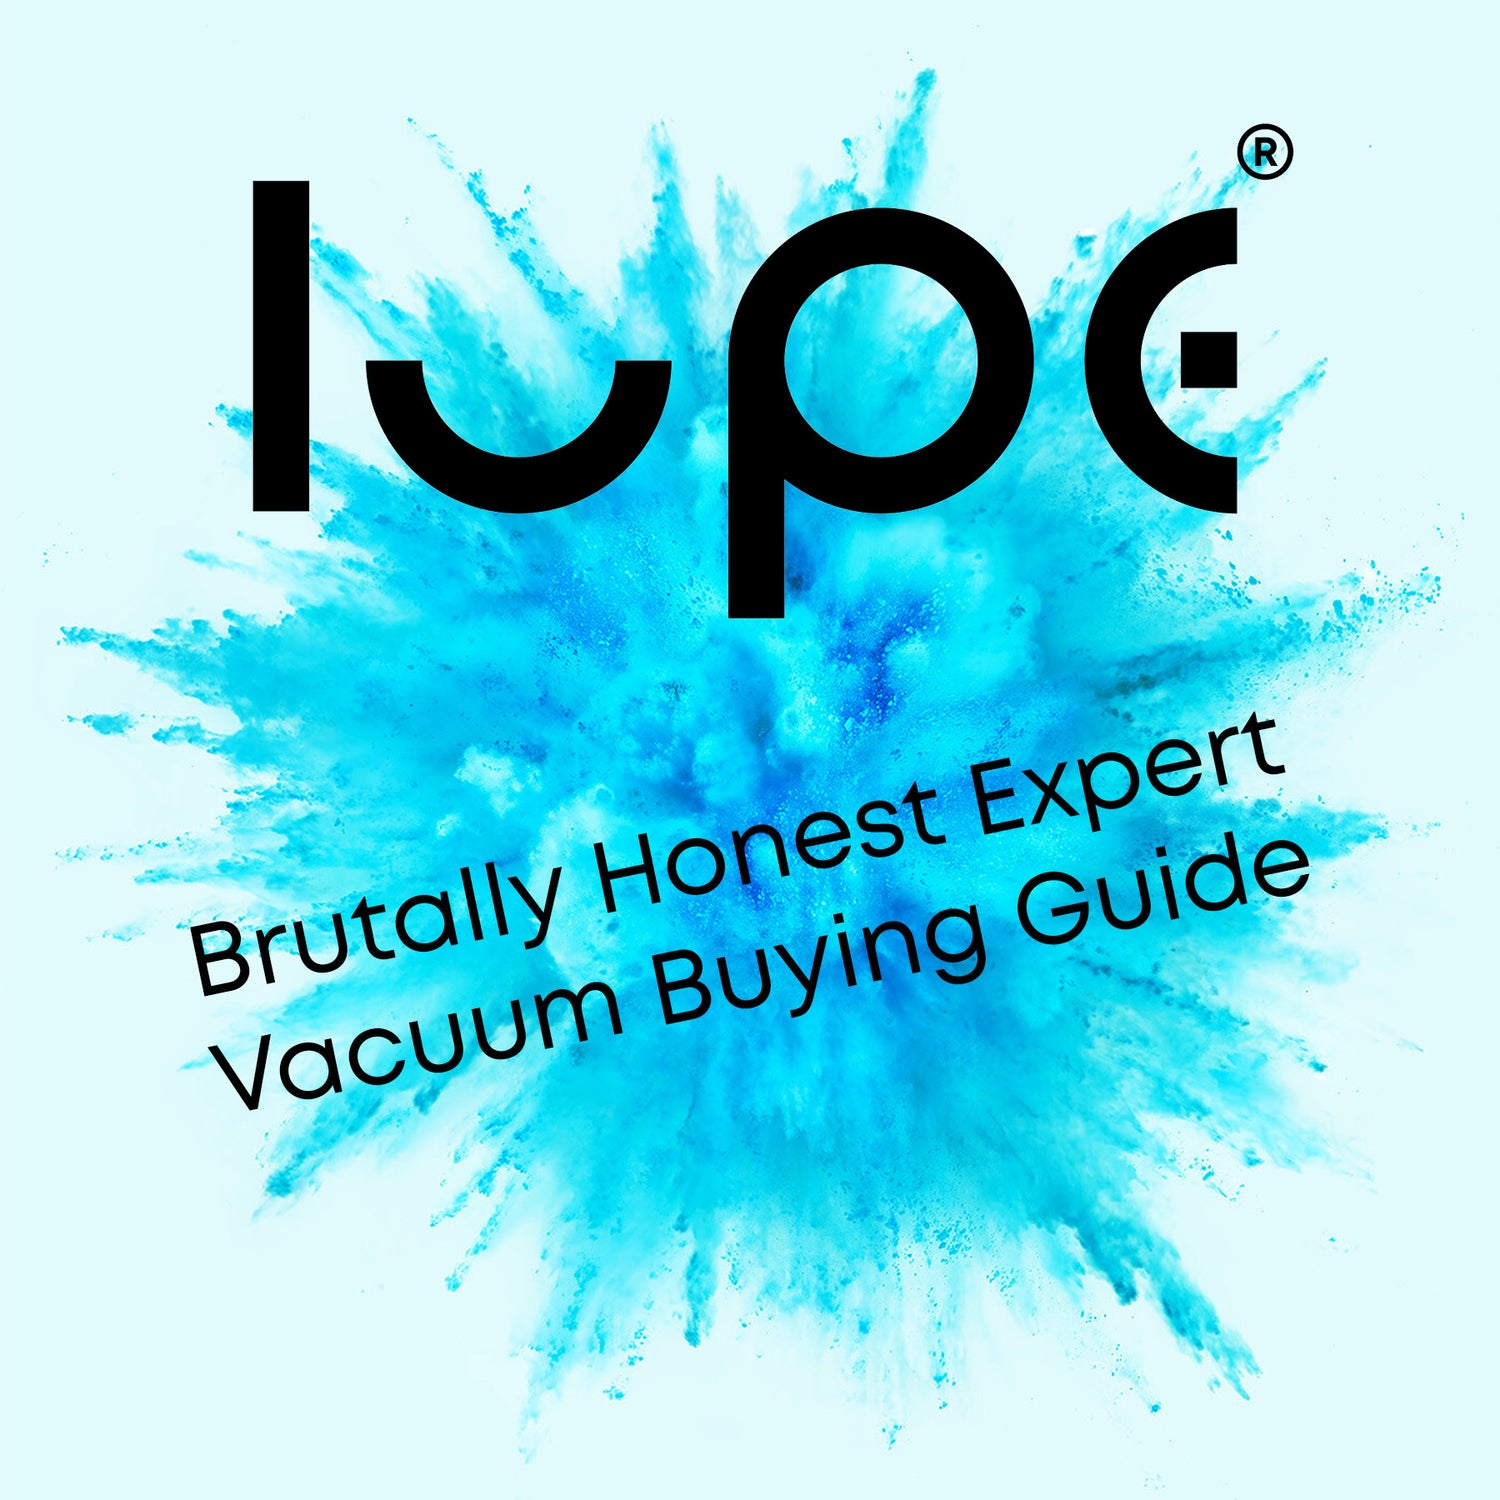 lupe® pure cordless crevice tool – Lupe Technology Inc.